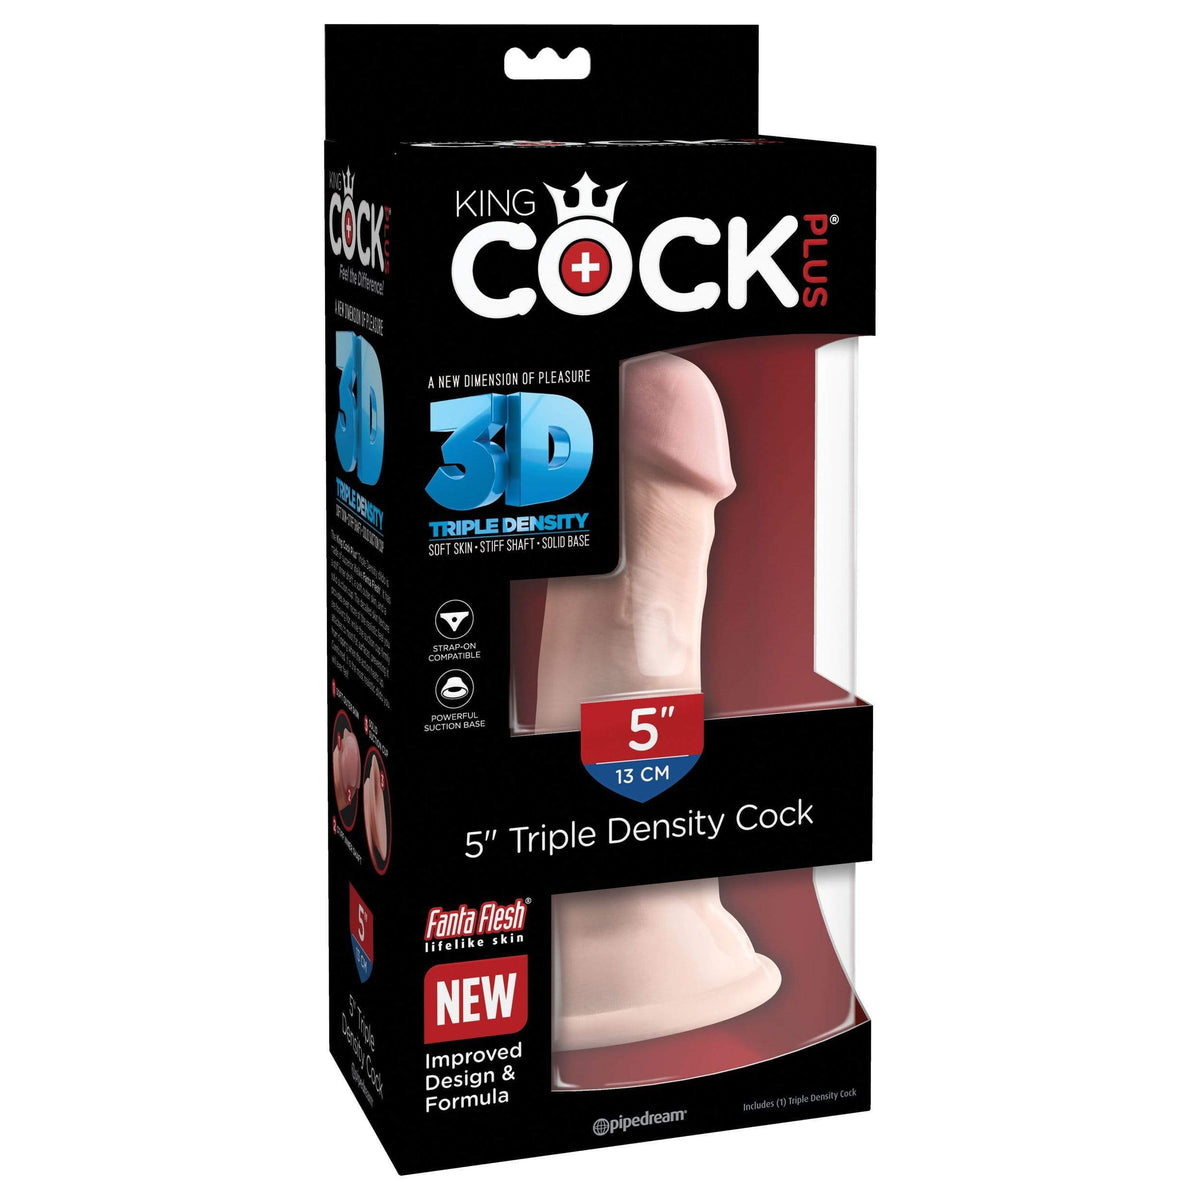 Pipedream - King Cock Plus 3D Triple Density Cock Dildo 5&quot; (Beige) Realistic Dildo with suction cup (Non Vibration) 603912762662 CherryAffairs